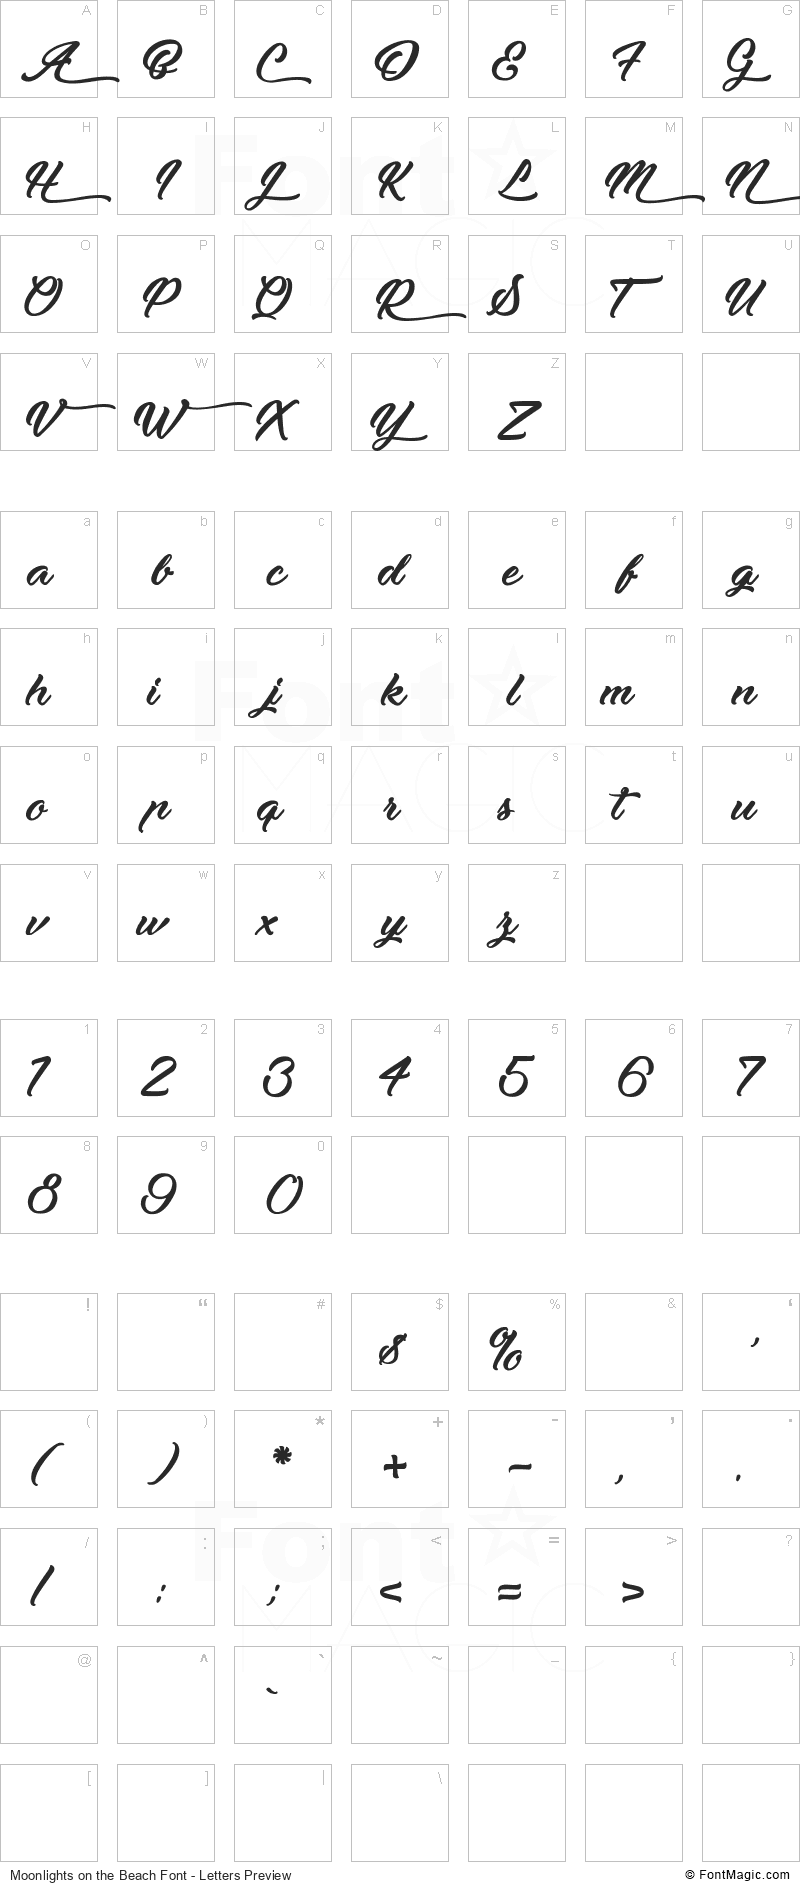 Moonlights on the Beach Font - All Latters Preview Chart